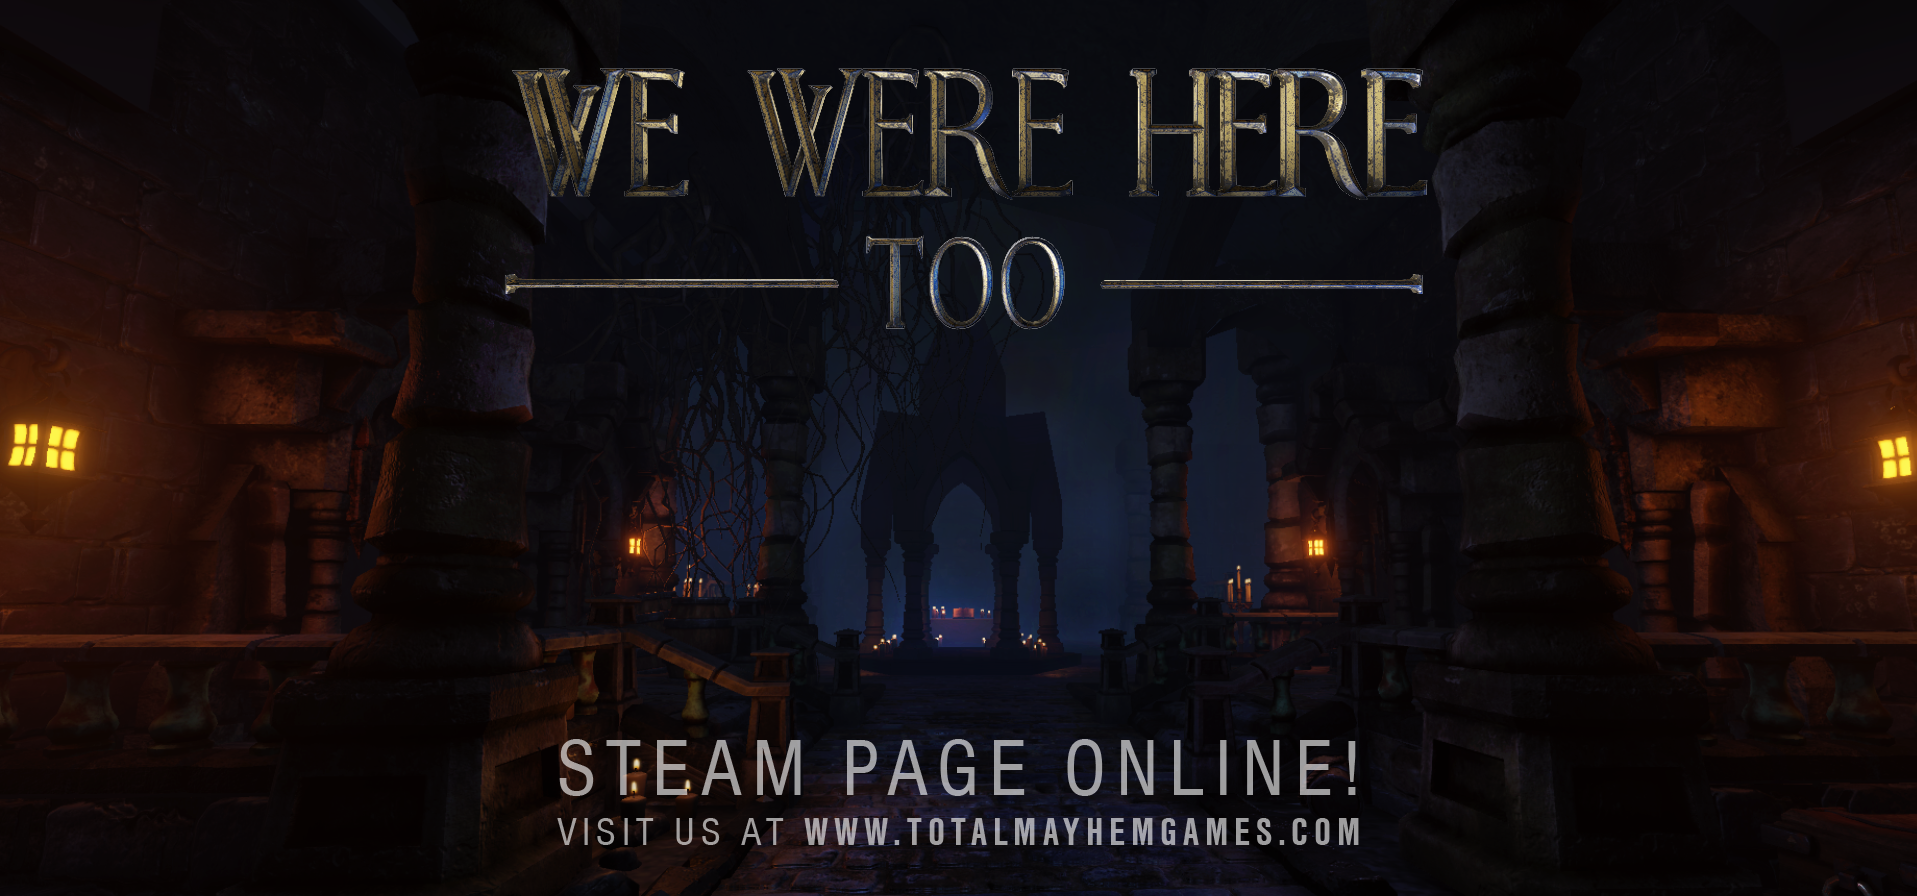 we were here too steam download